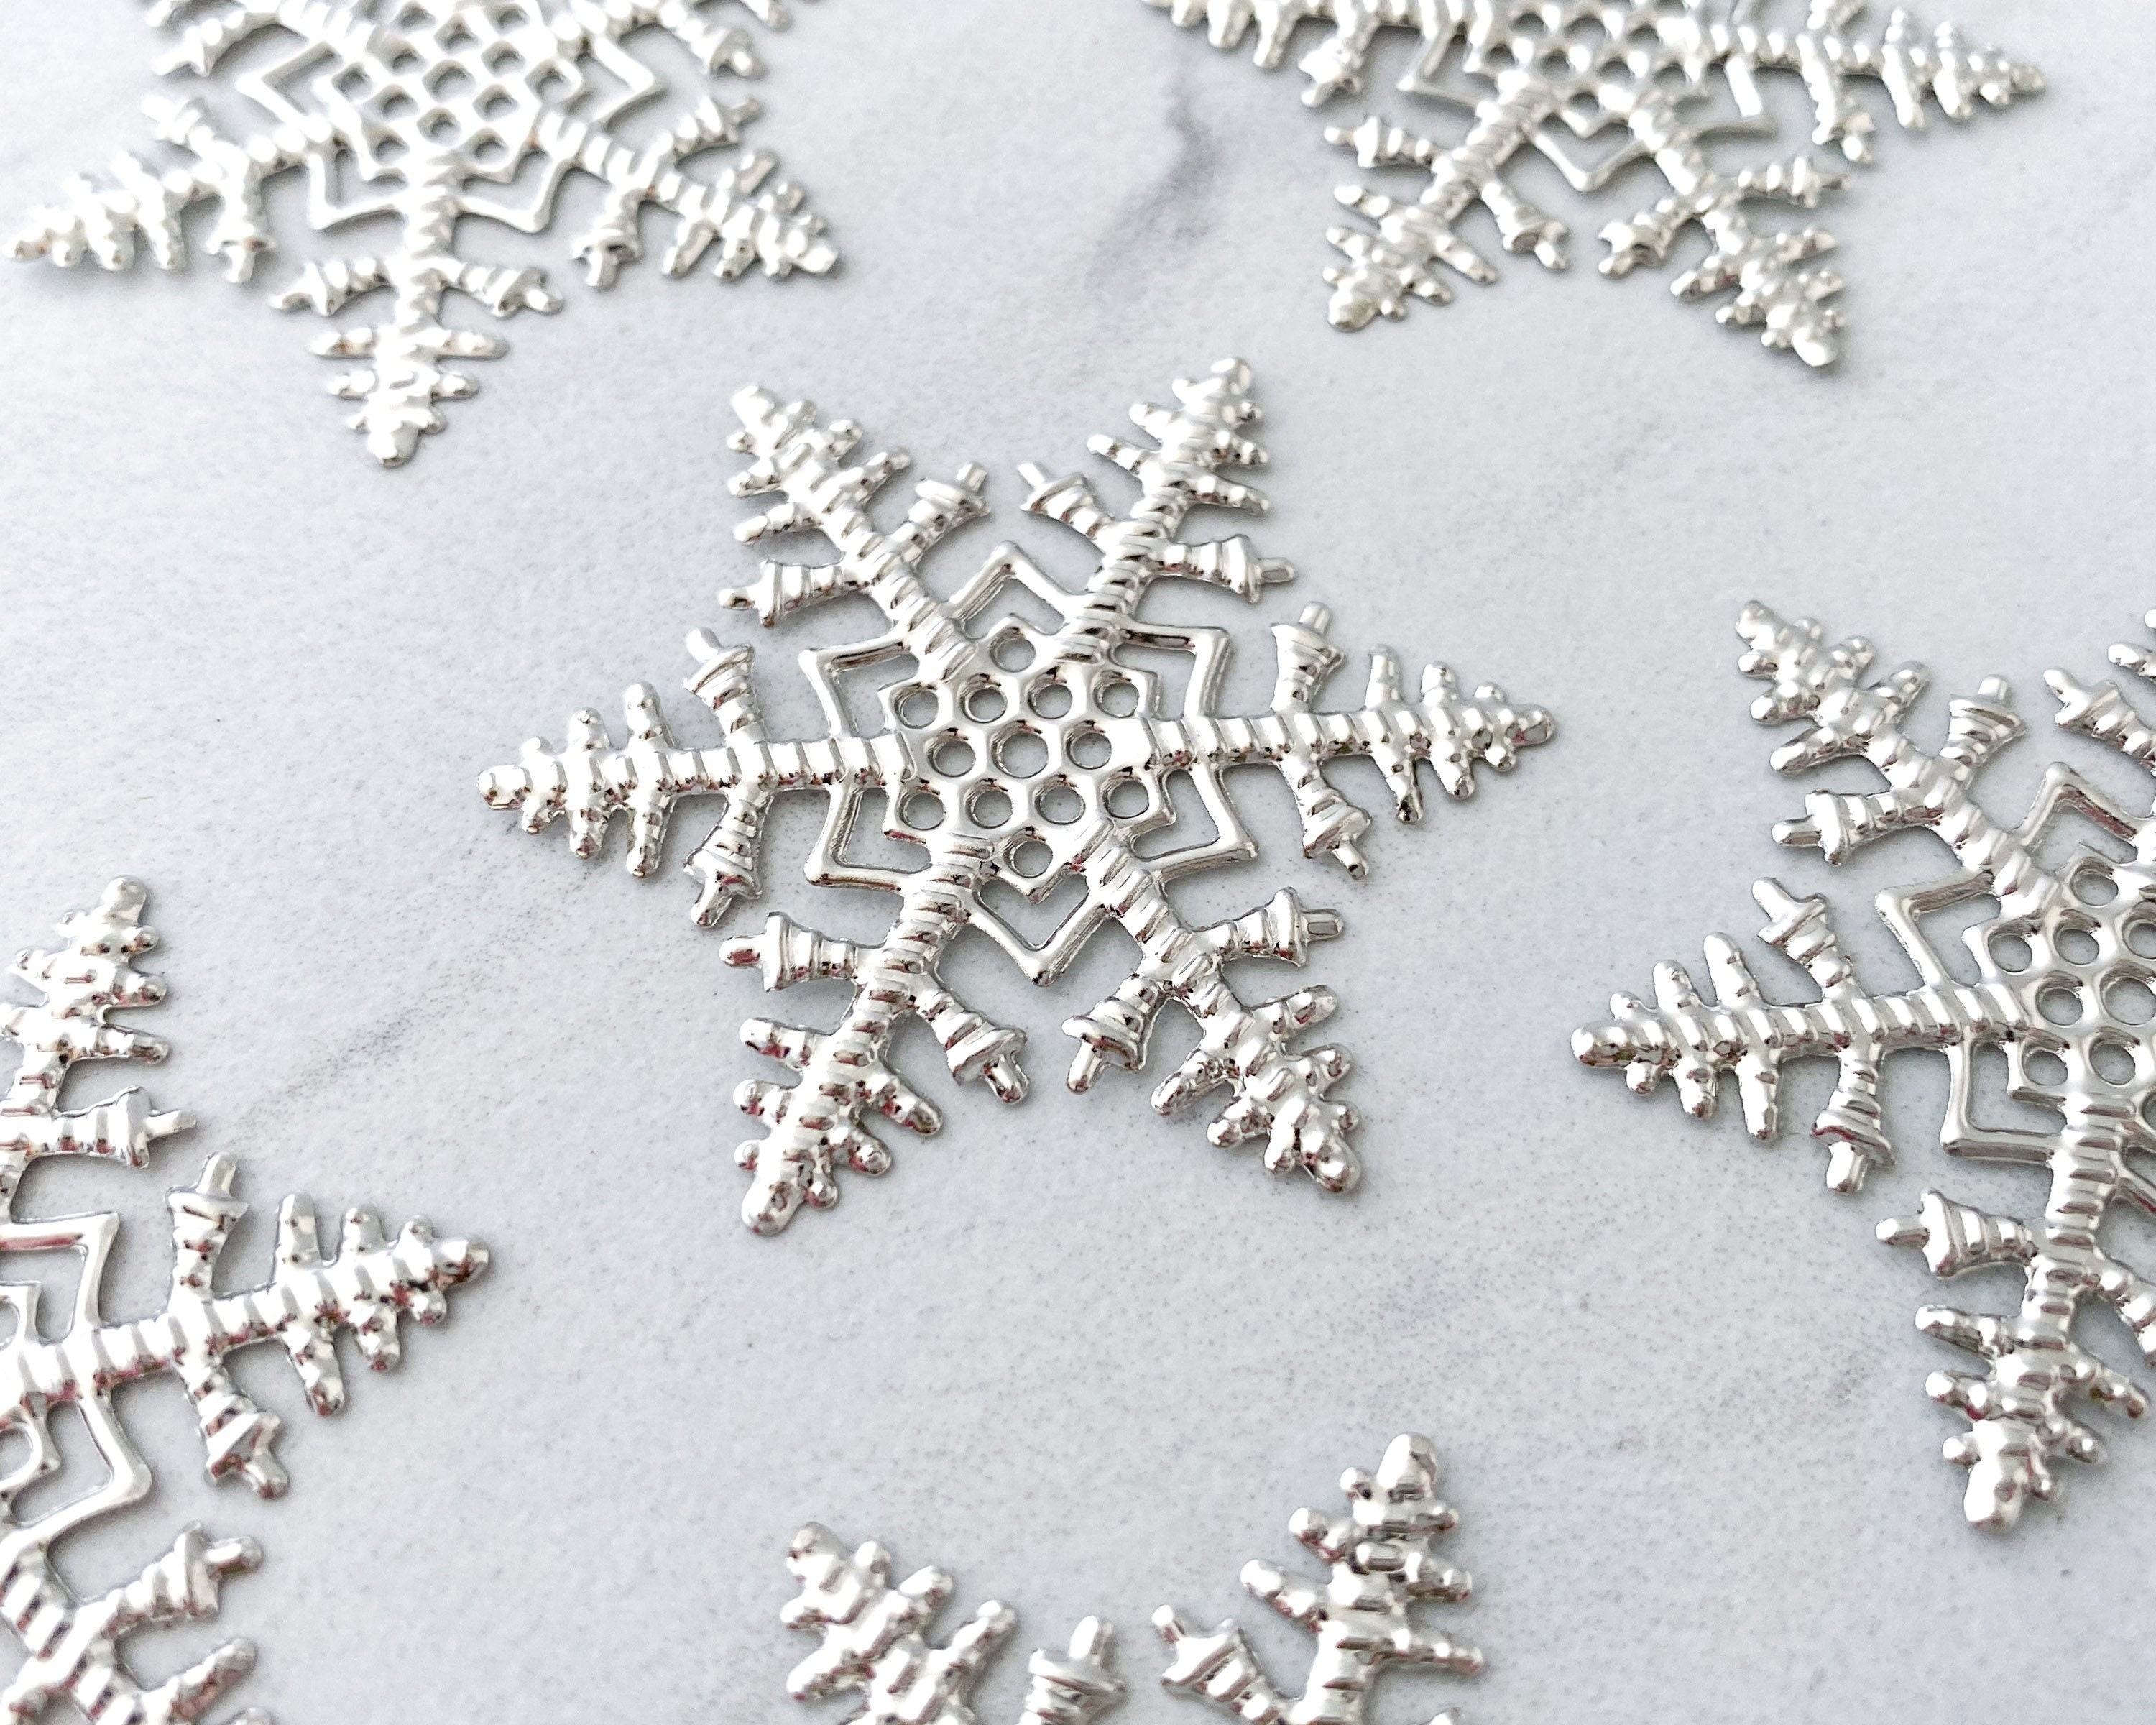 Whote Styrofoam Snowflake, Christmas Decorations, Winter Décor, Foam  Shapes, Kids Crafts, Craft Supplies, Polystyrene Shapes. DIY Projects